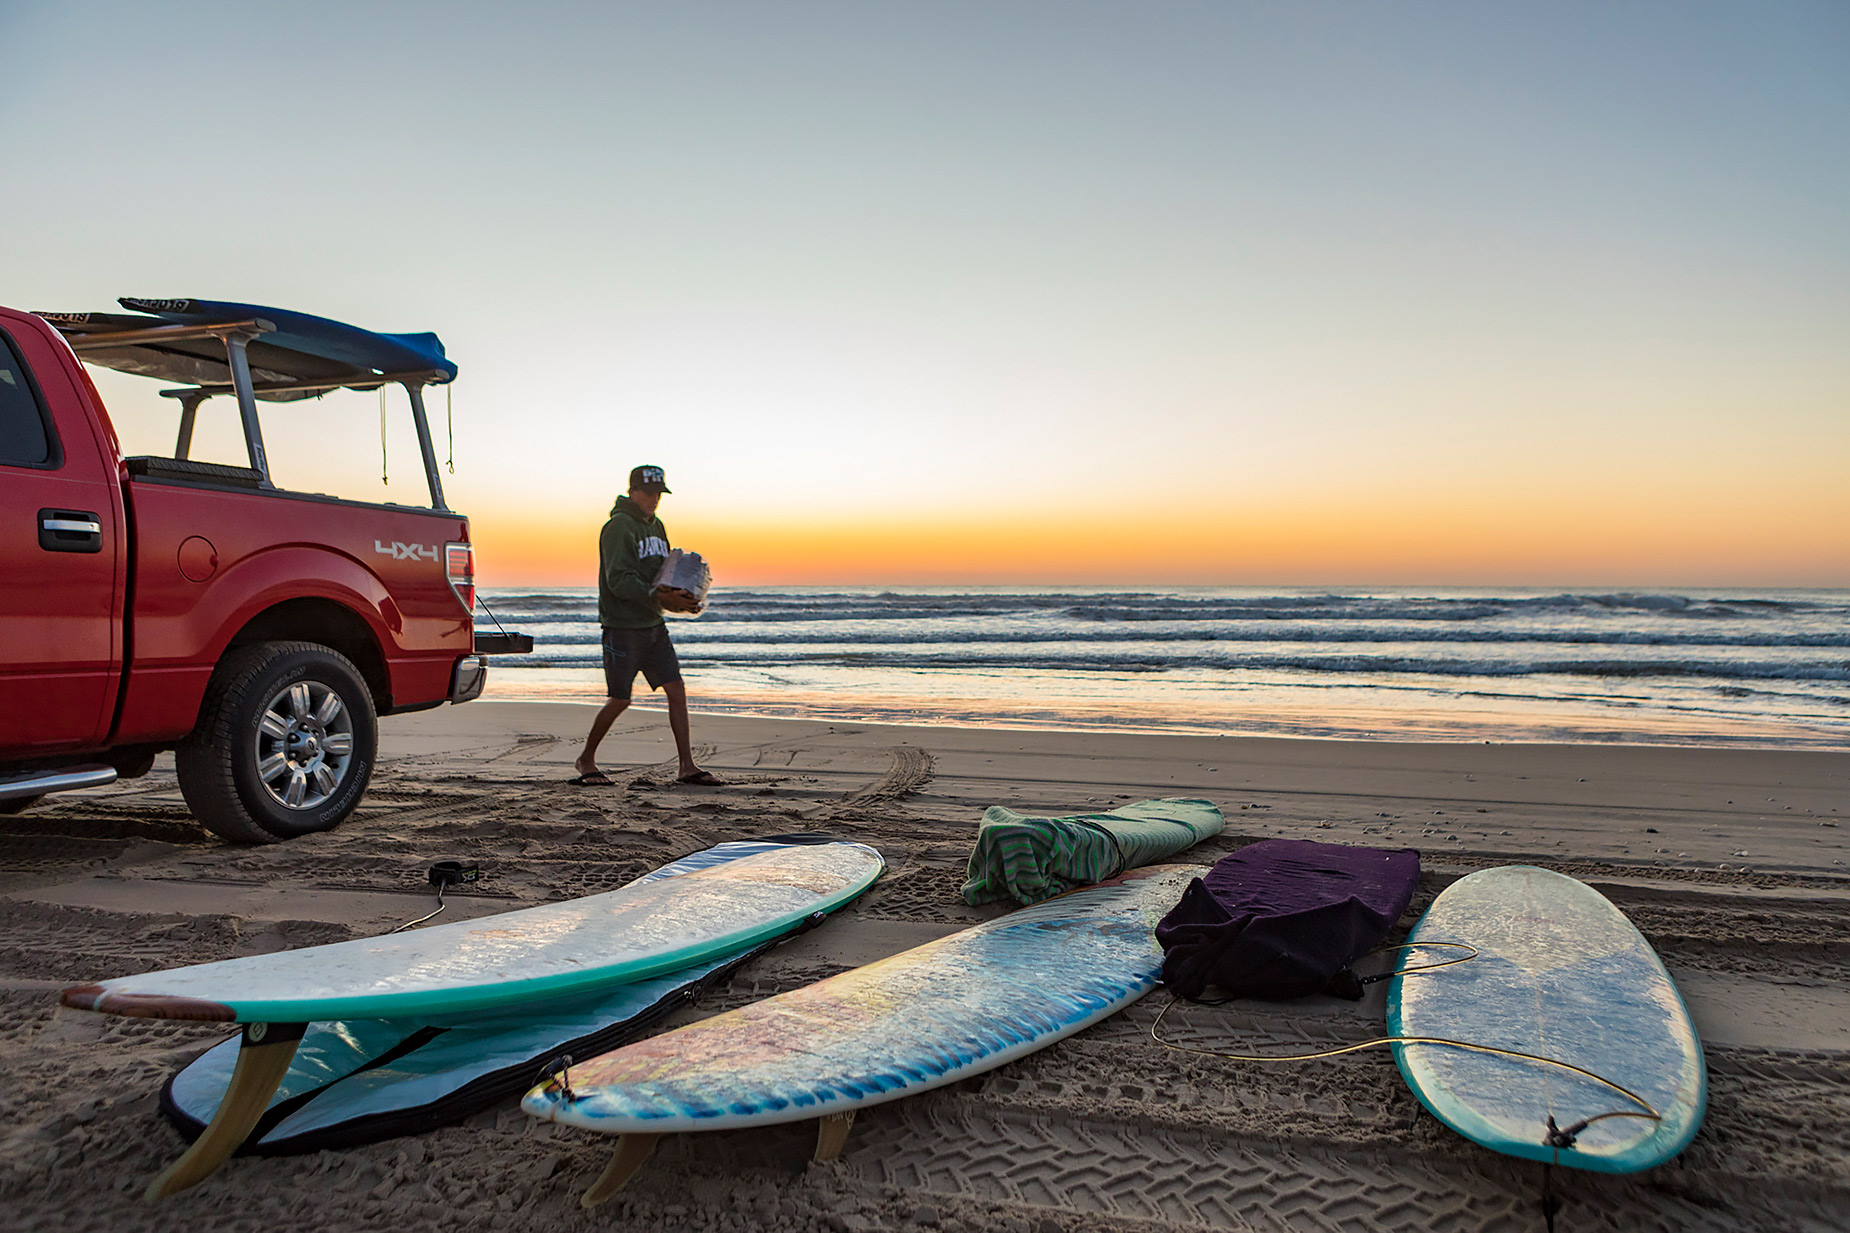 Texas surfer with surfboards and truck on the beach 